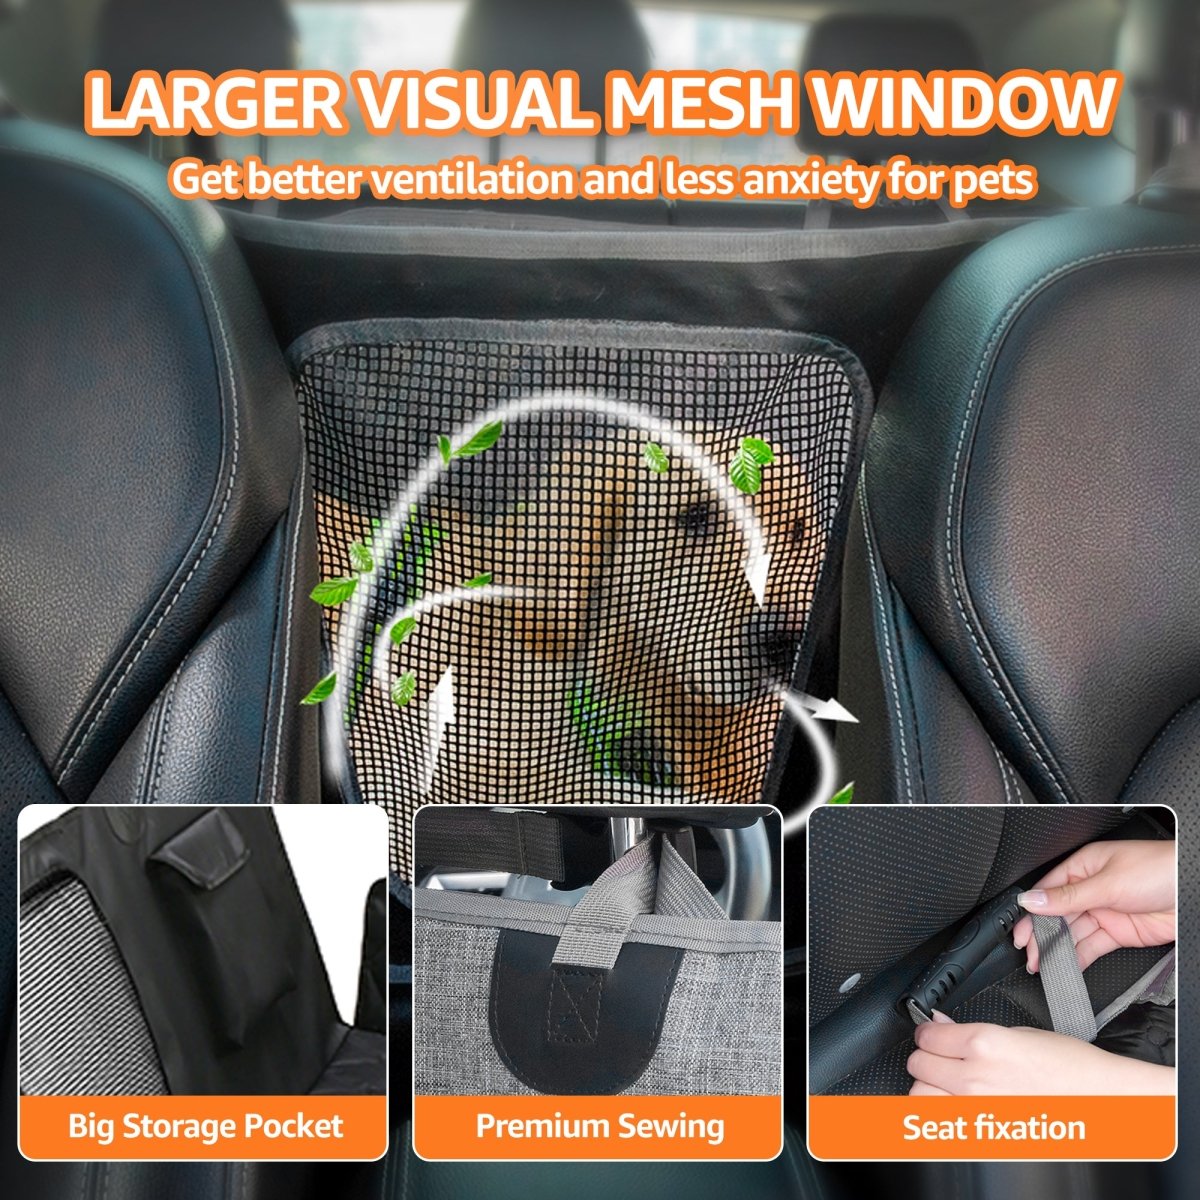 Dog Seat Cover, Car Rear Seat Protector for Dogs with Mesh Viewing Window &  Storage Pocket, Non-Scratch Nonslip Back Seat Cover for Cars SUVs Trucks 